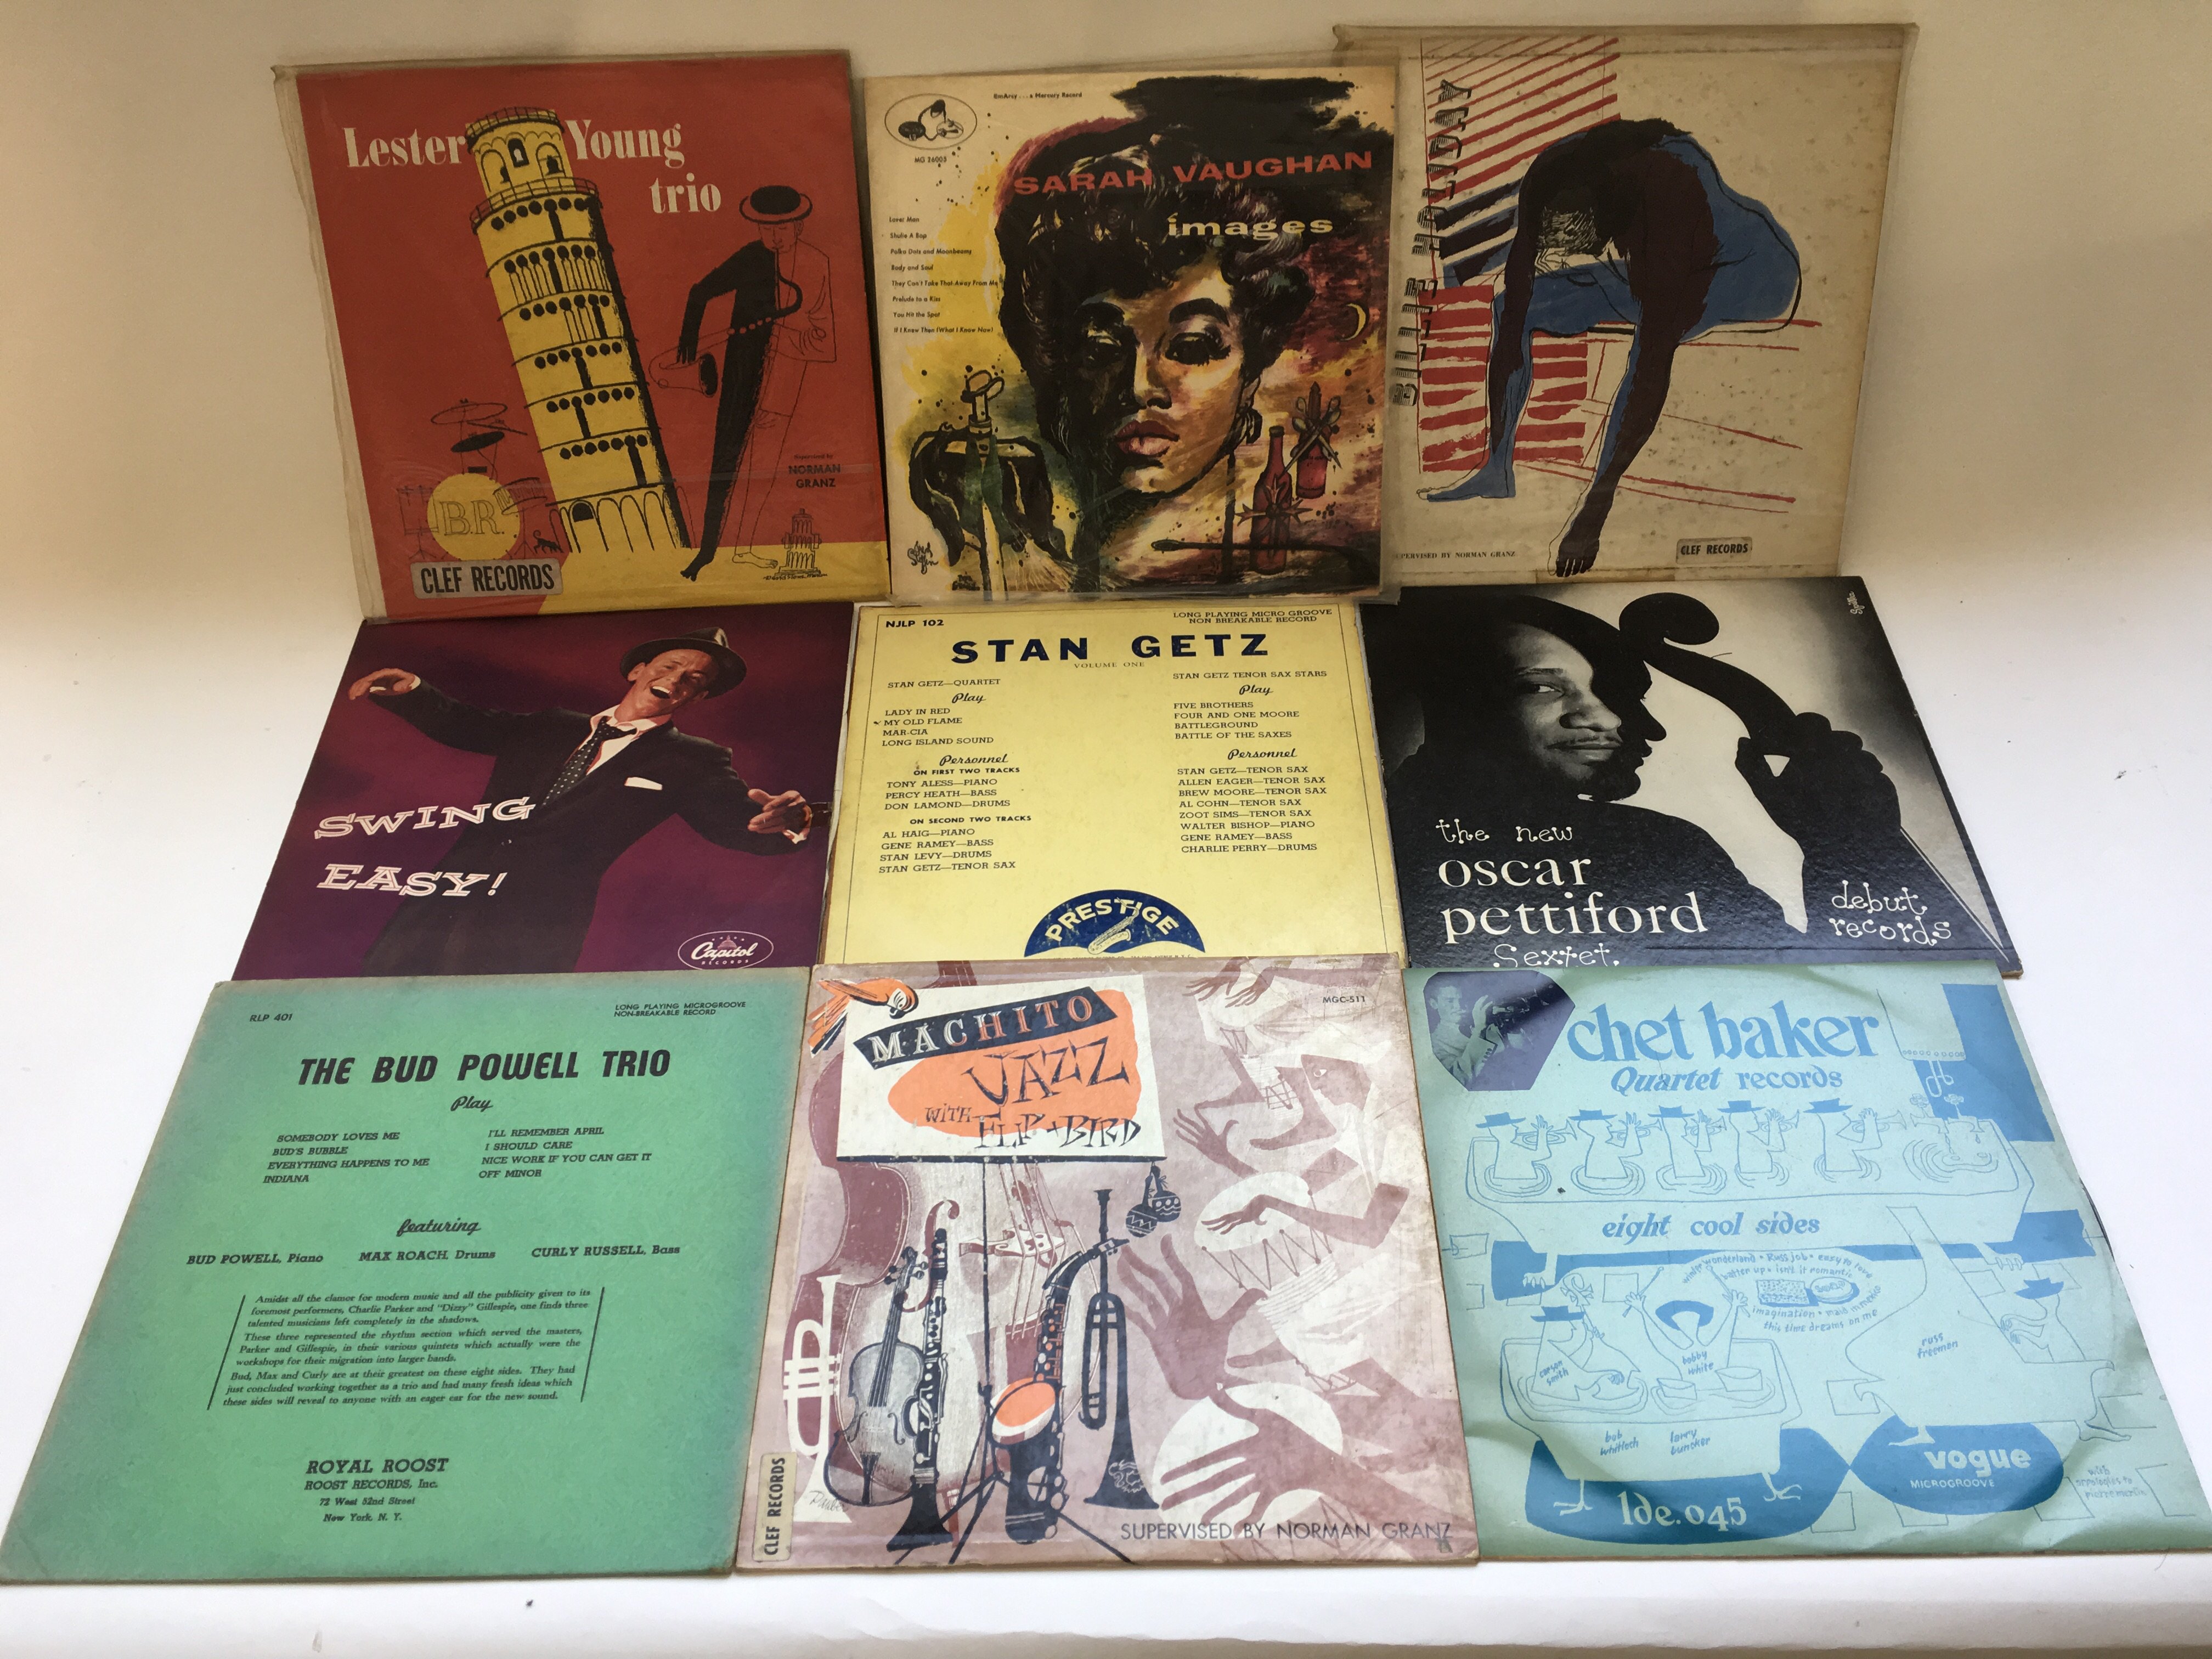 A collection of 10 inch Jazz vinyl records by vari